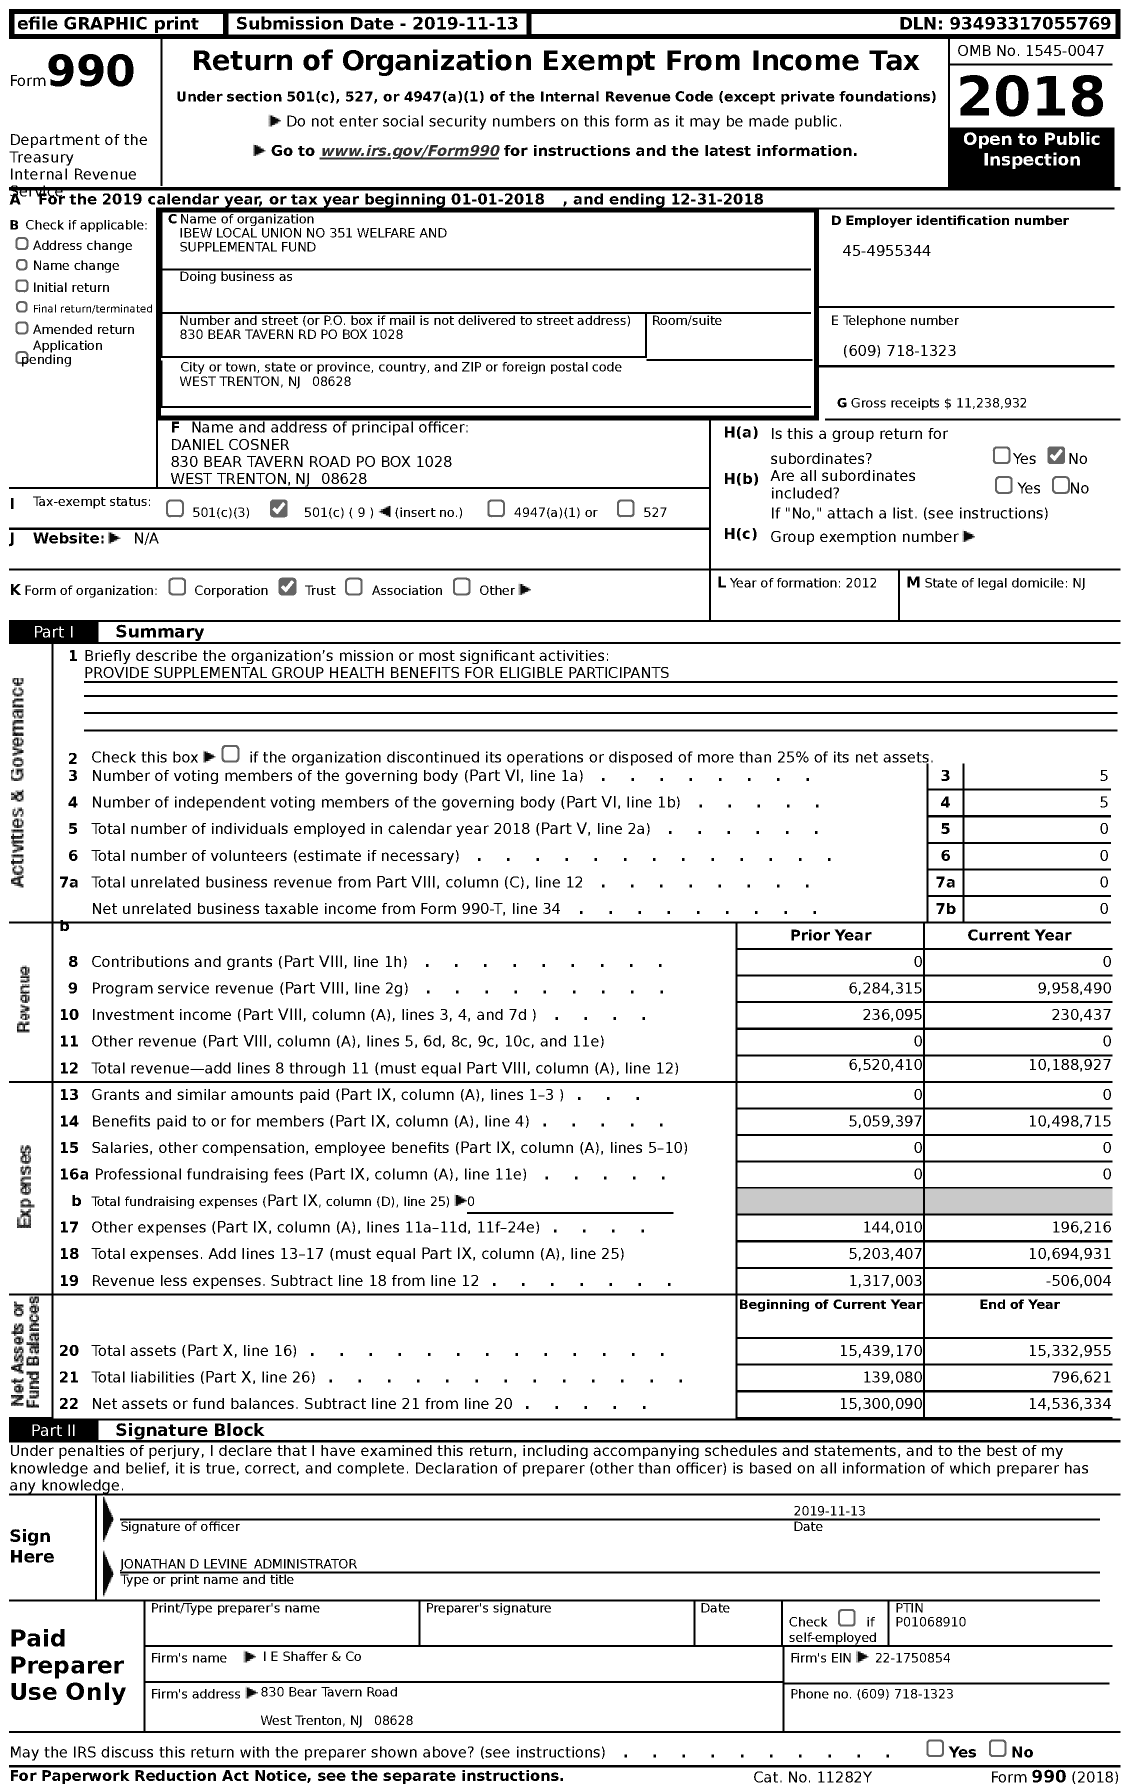 Image of first page of 2018 Form 990 for IBEW Local Union No 351 Welfare and Supplemental Fund